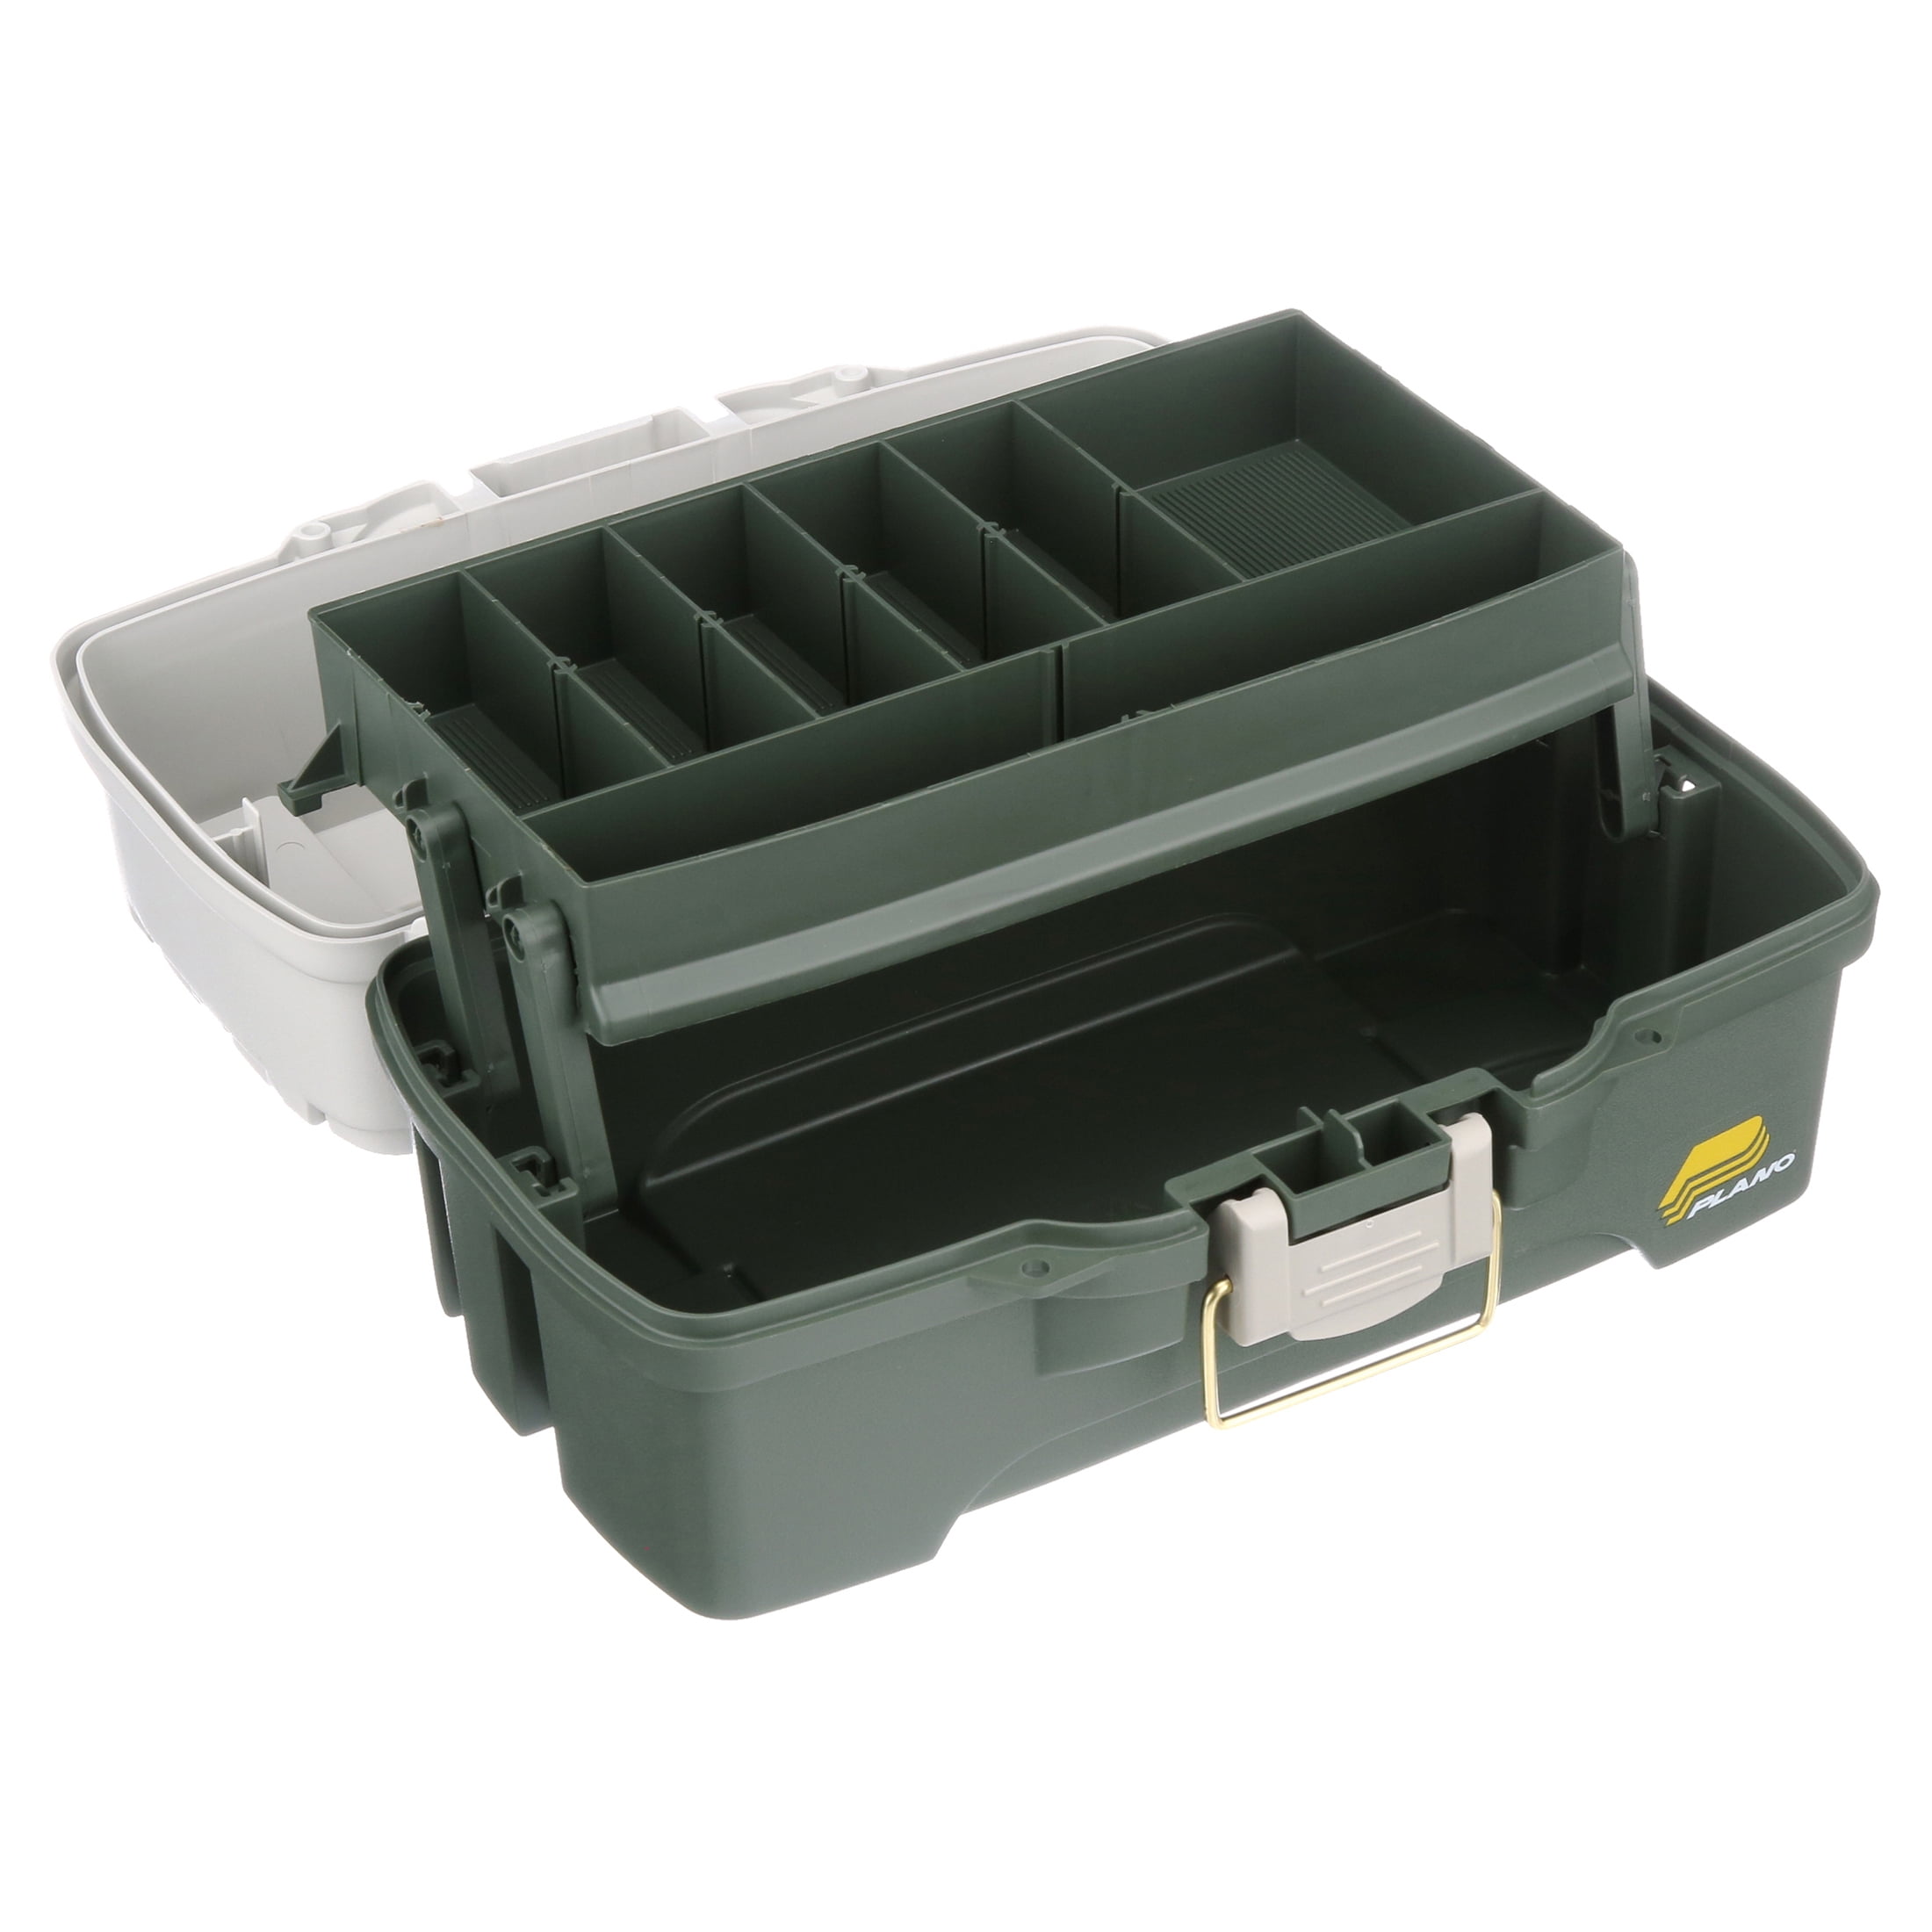 Plano 6201 One-Tray Tackle Box, Bait Storage, Extending Cantilever-tray  Design